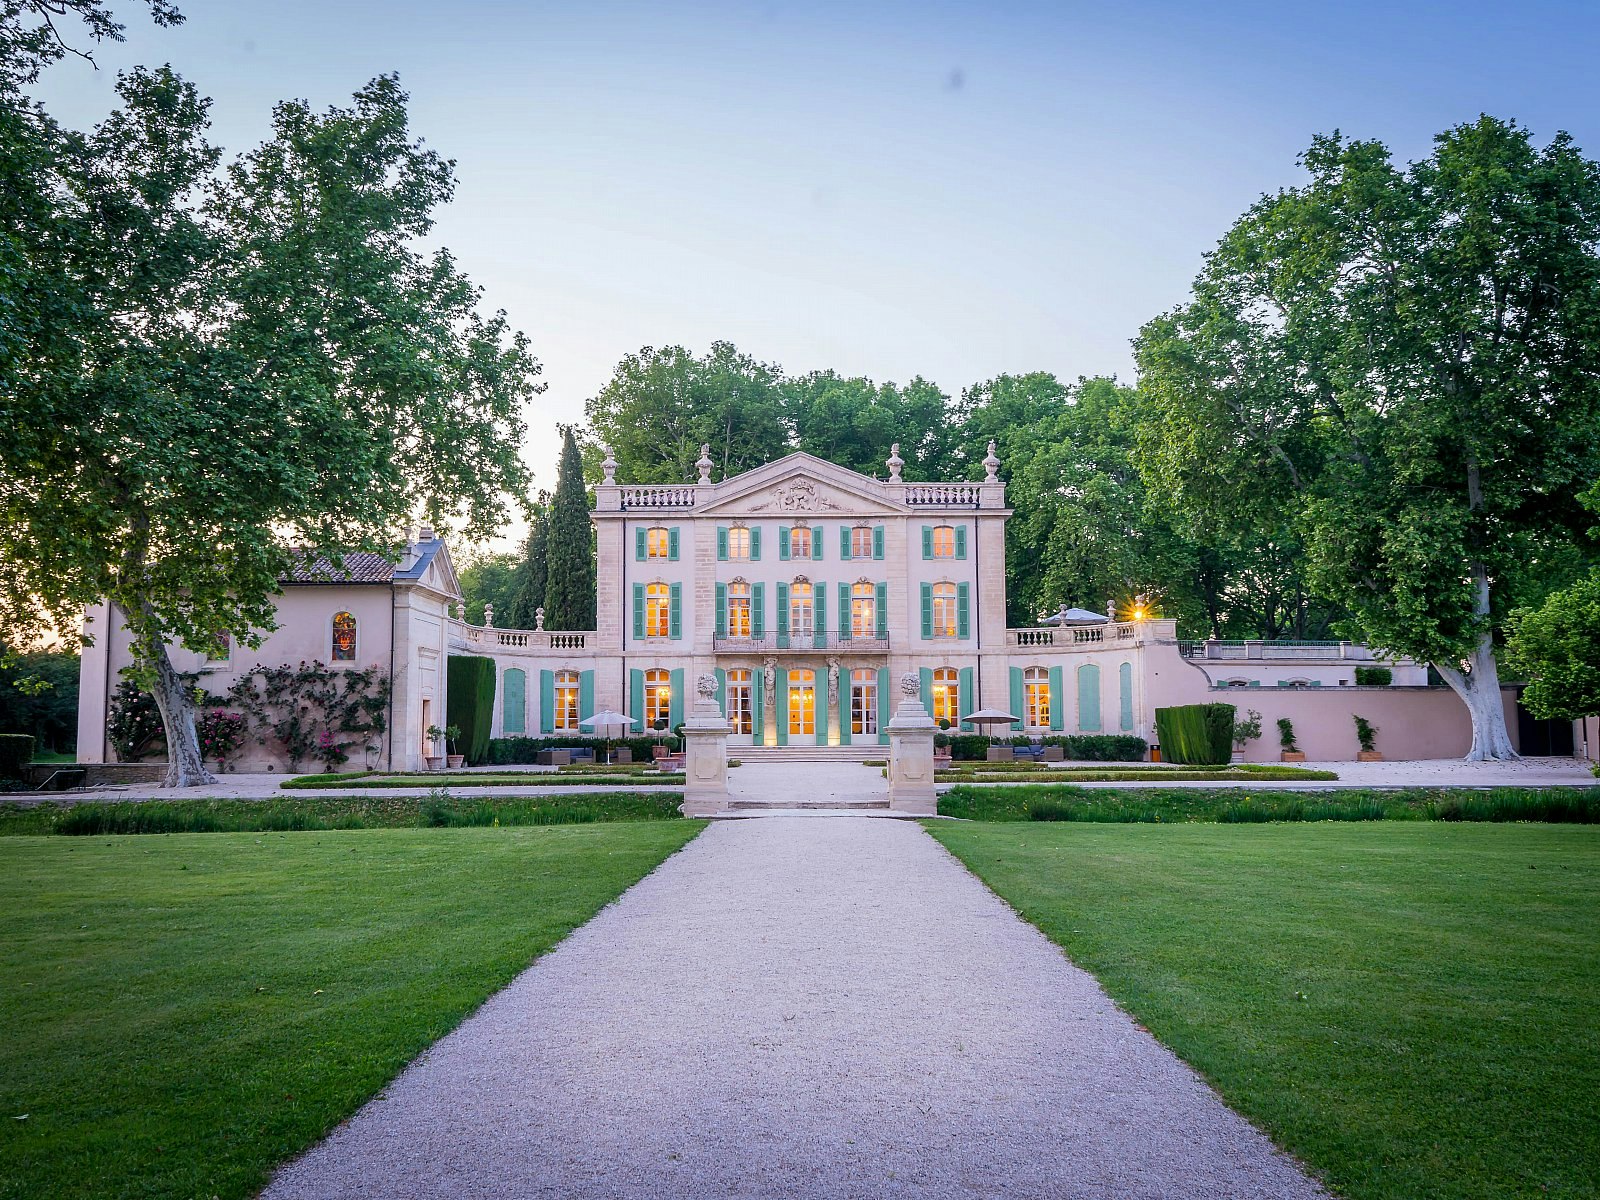 A gravel driveway leading up to an imposing stone French chateau, which has bright turquoise shutters on its windows; the building is surrounded by verdant greenery.